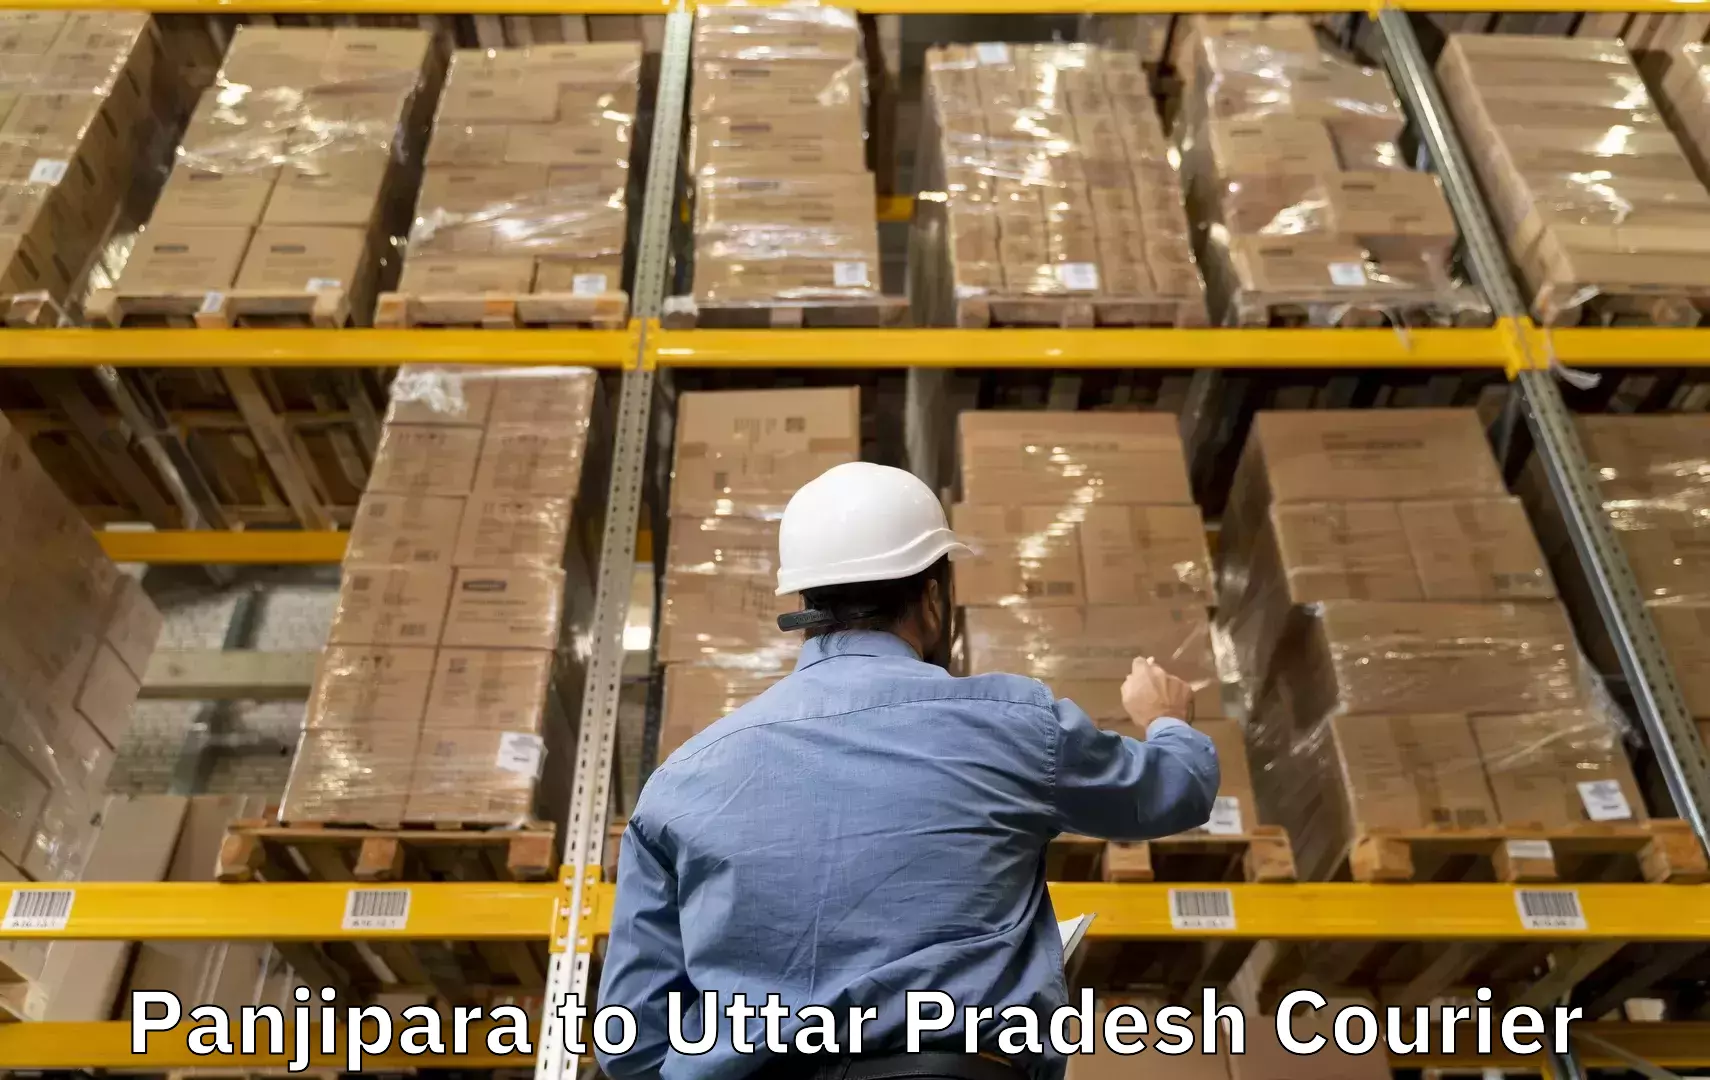 Baggage delivery support Panjipara to Gorakhpur